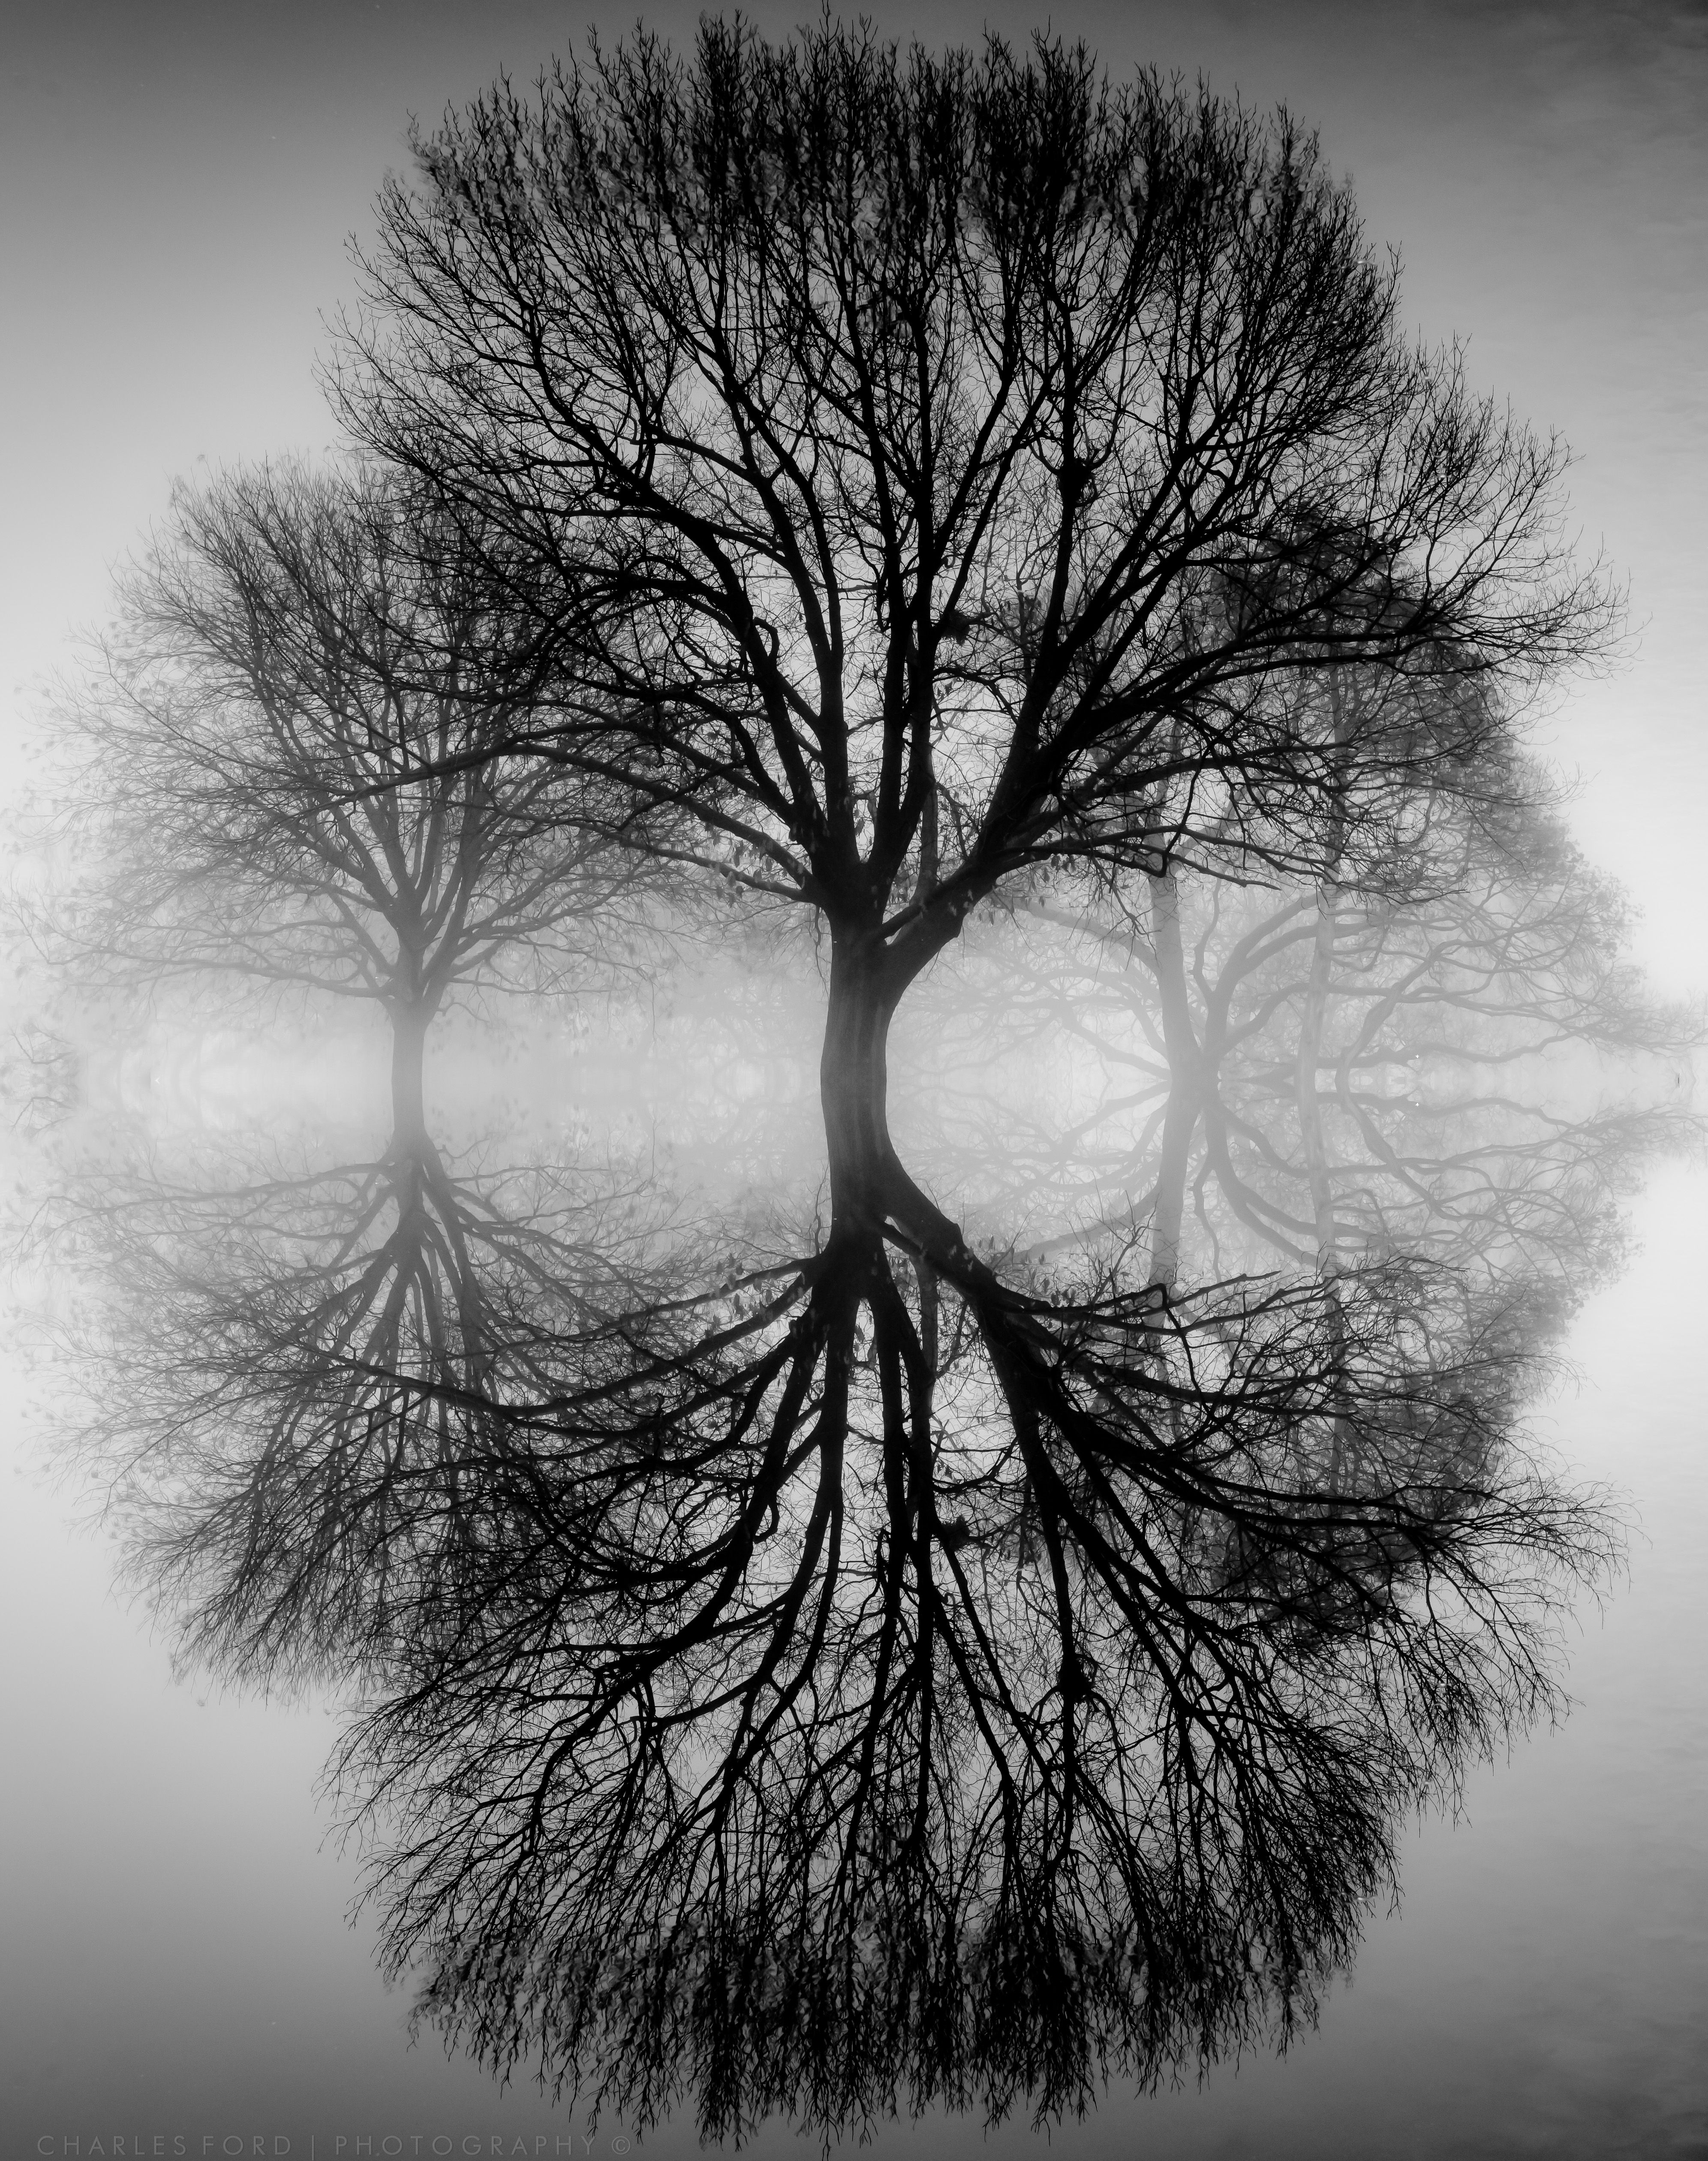 Reflections | Ansel adams, Reflection and Photography